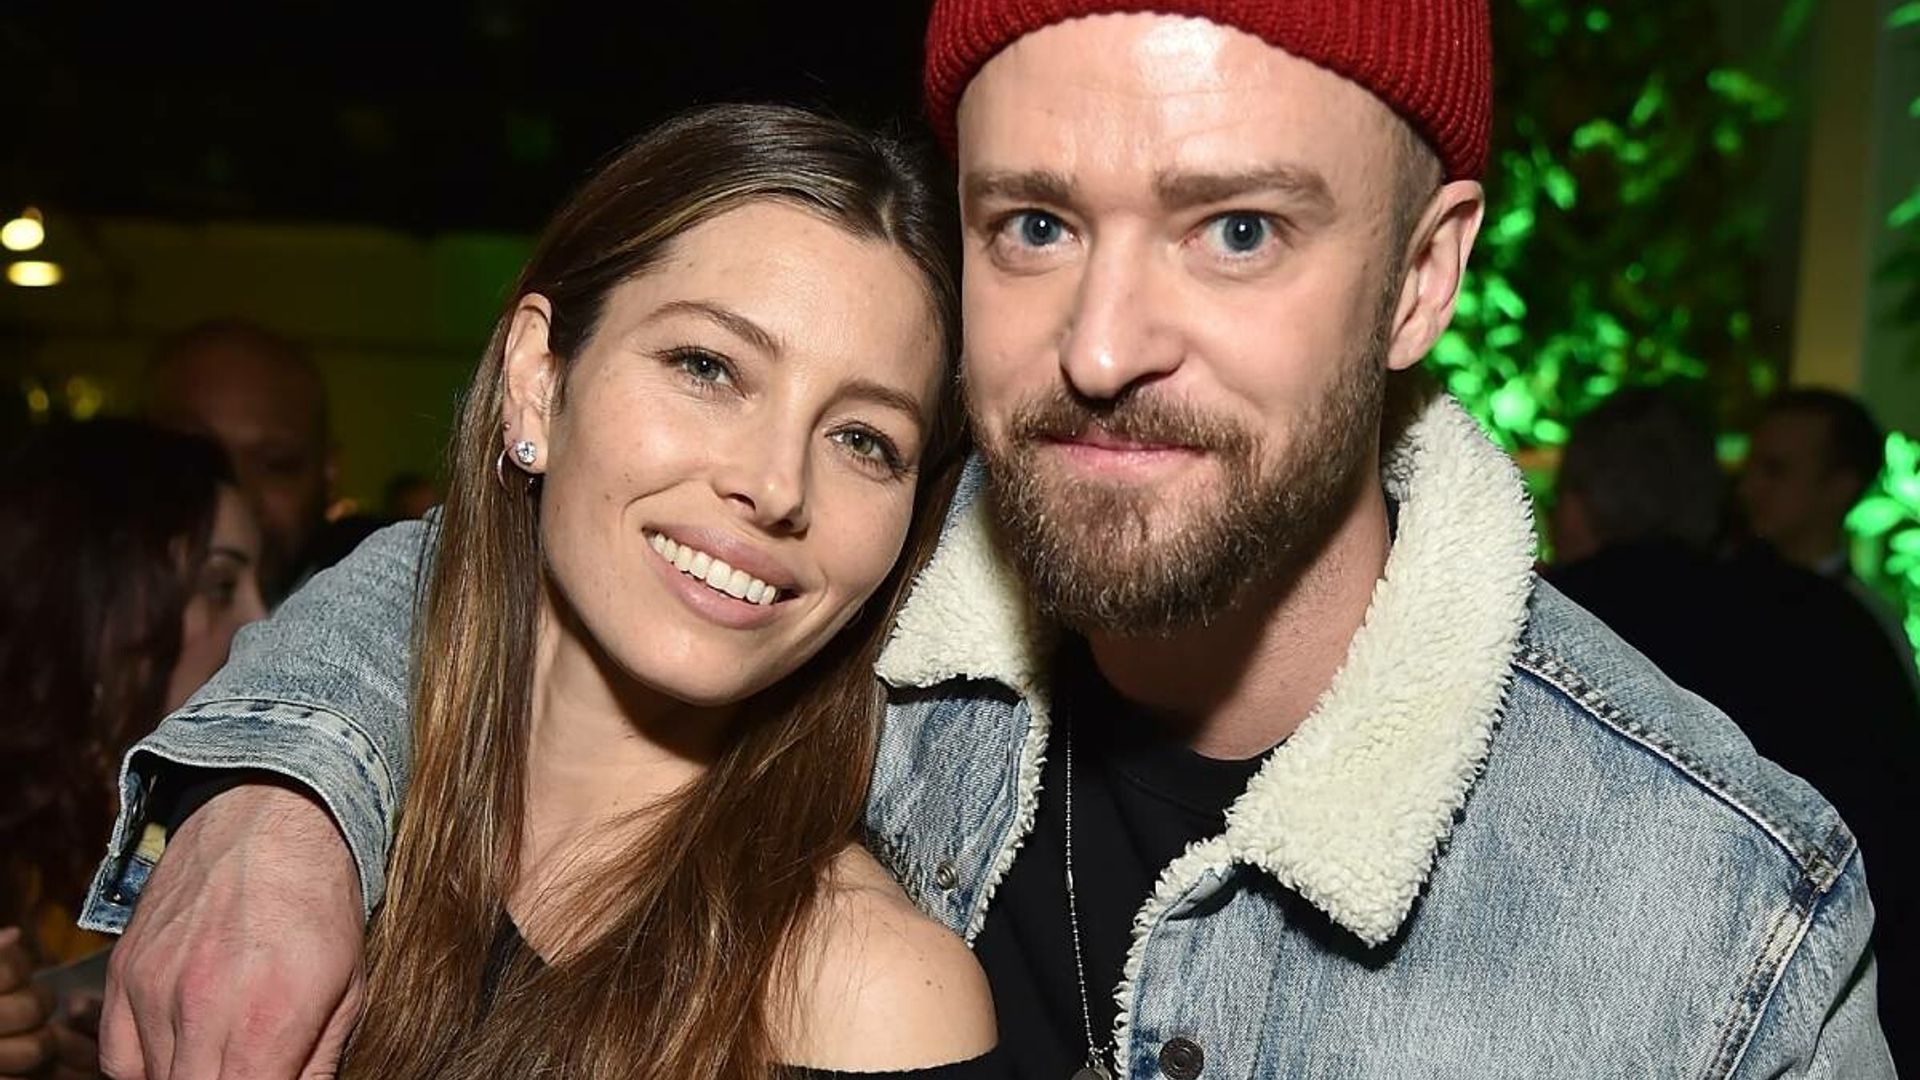 Justin Timberlake confirms he and wife Jessica Biel welcomed second son